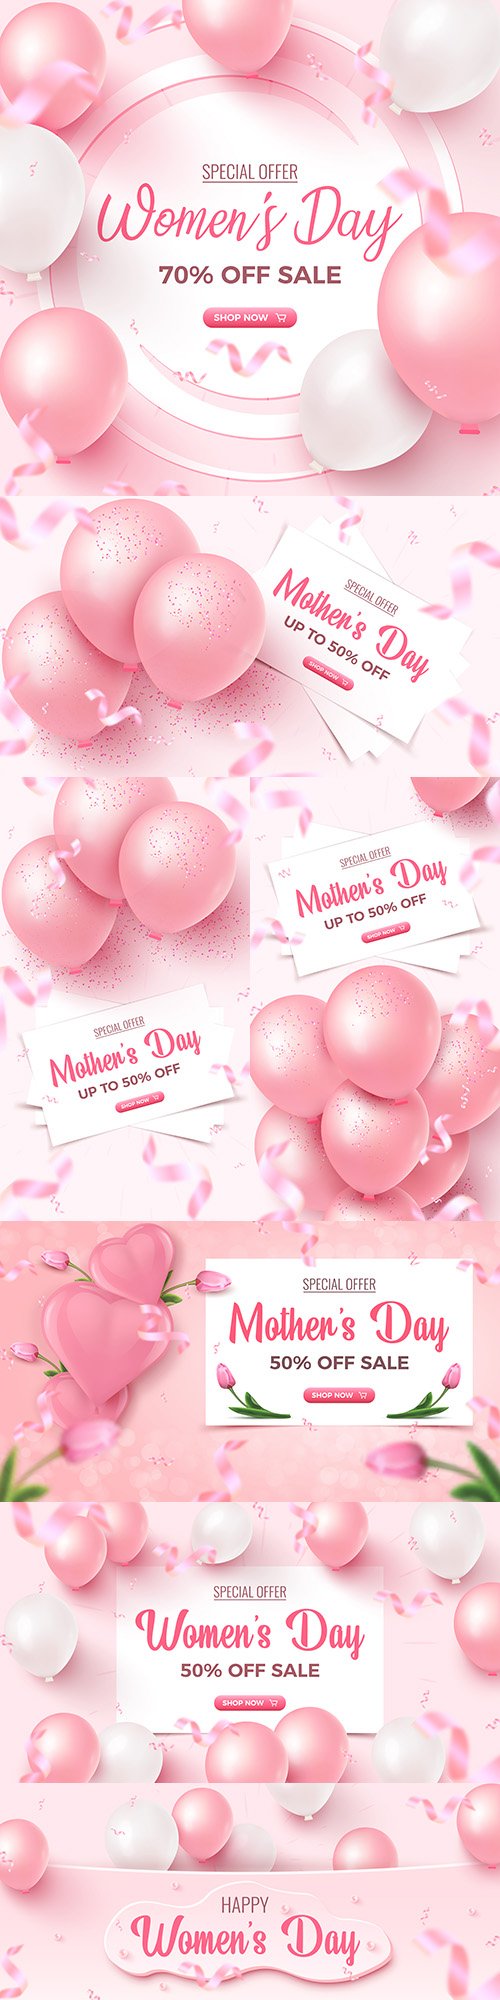 Mother 's Day special offer design poster in pink